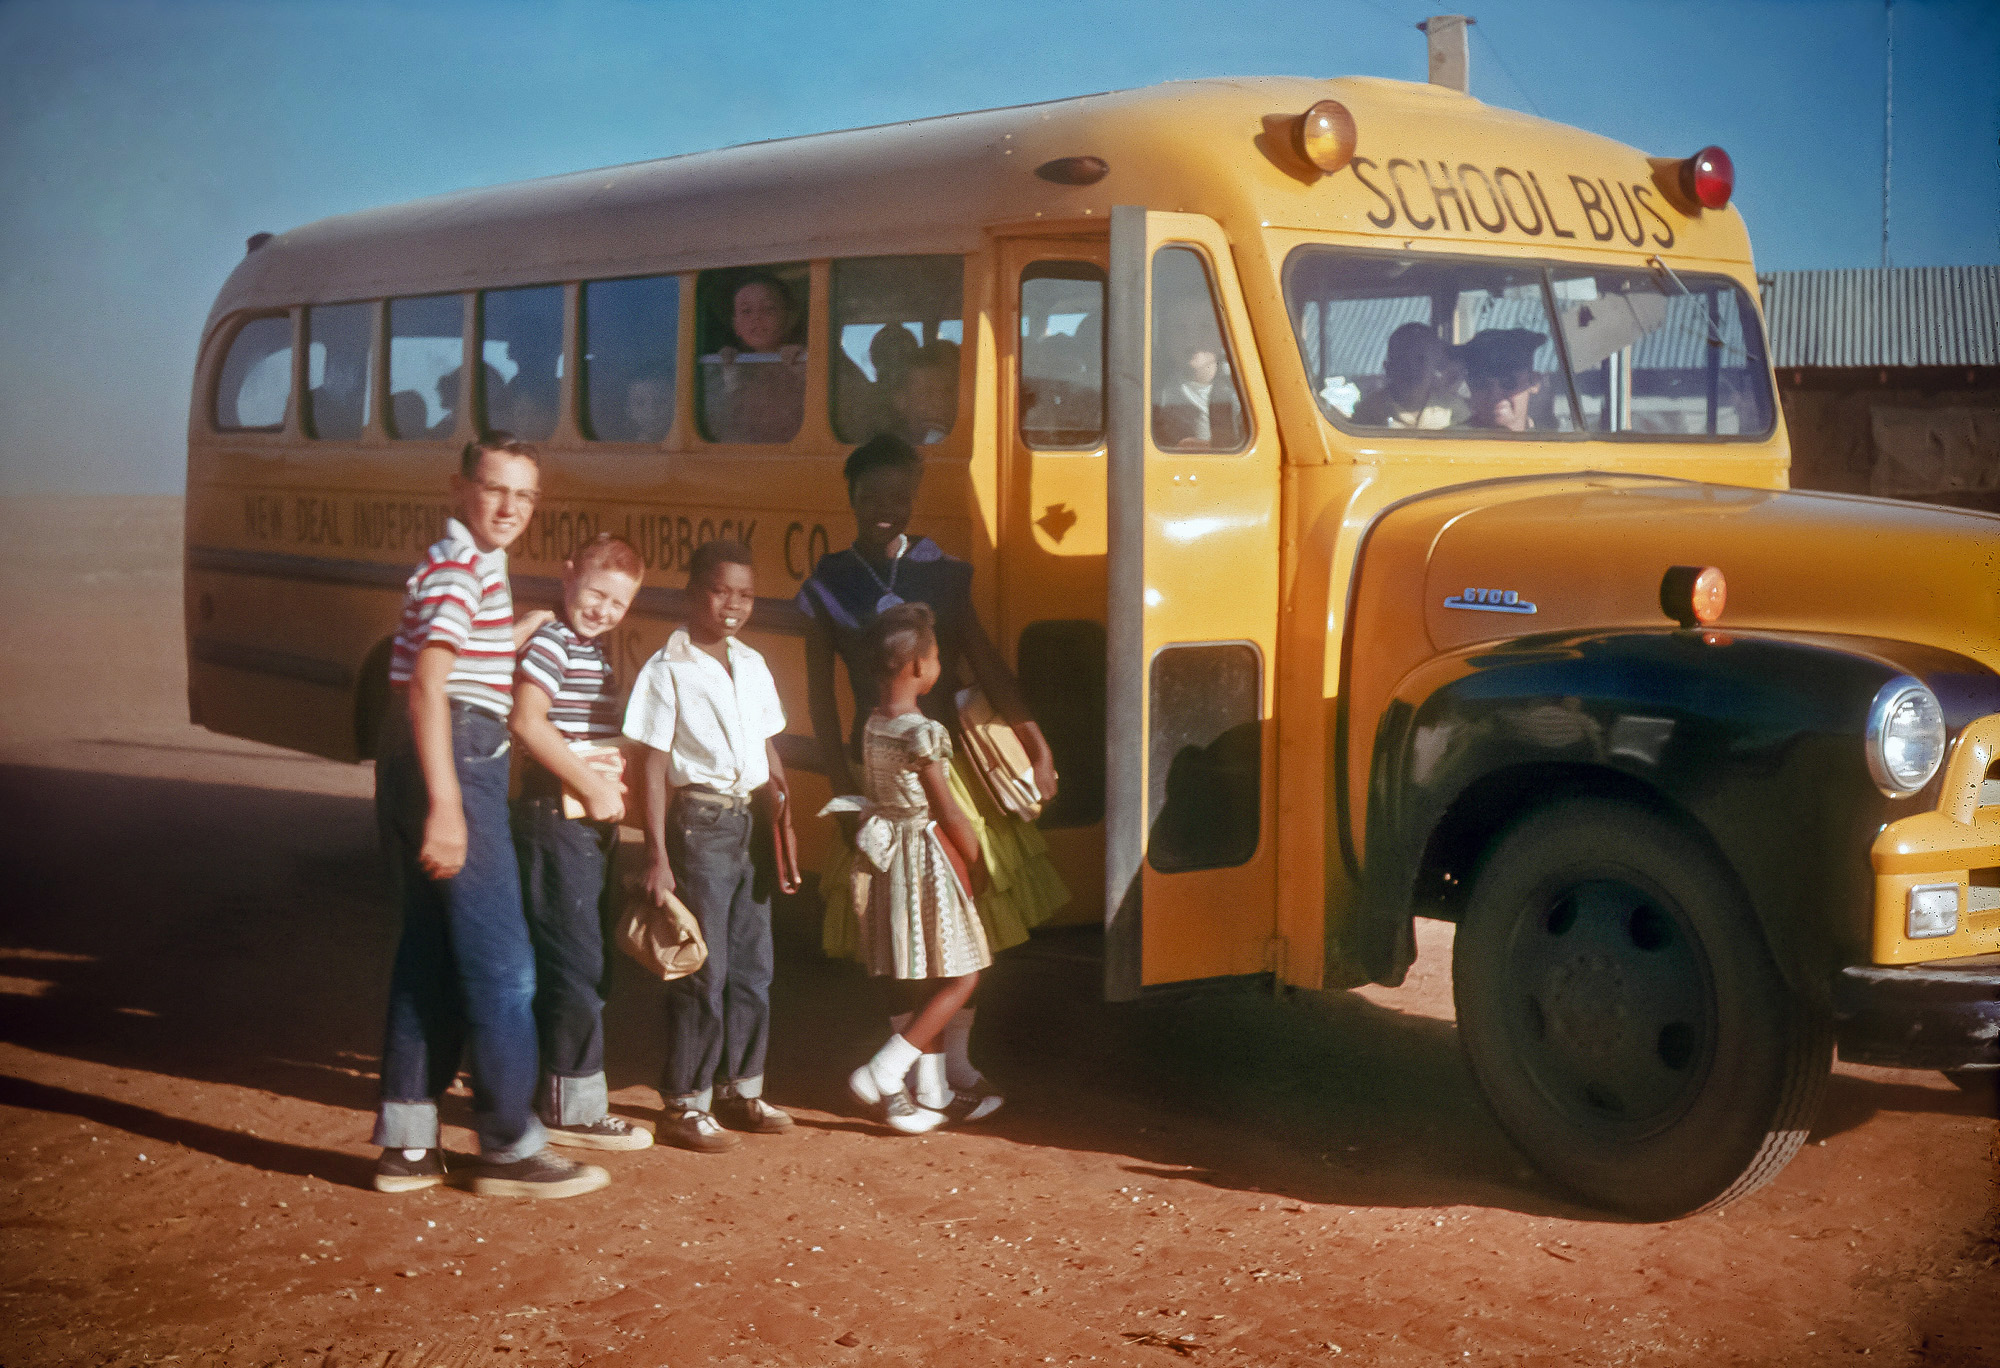 My dad (red-headed flat-top kid) with his books in hand, squinting from the sun, and his brother (taller white kid), about to board the school bus with their fellow classmates in New Deal, Texas in 1957. View full size.